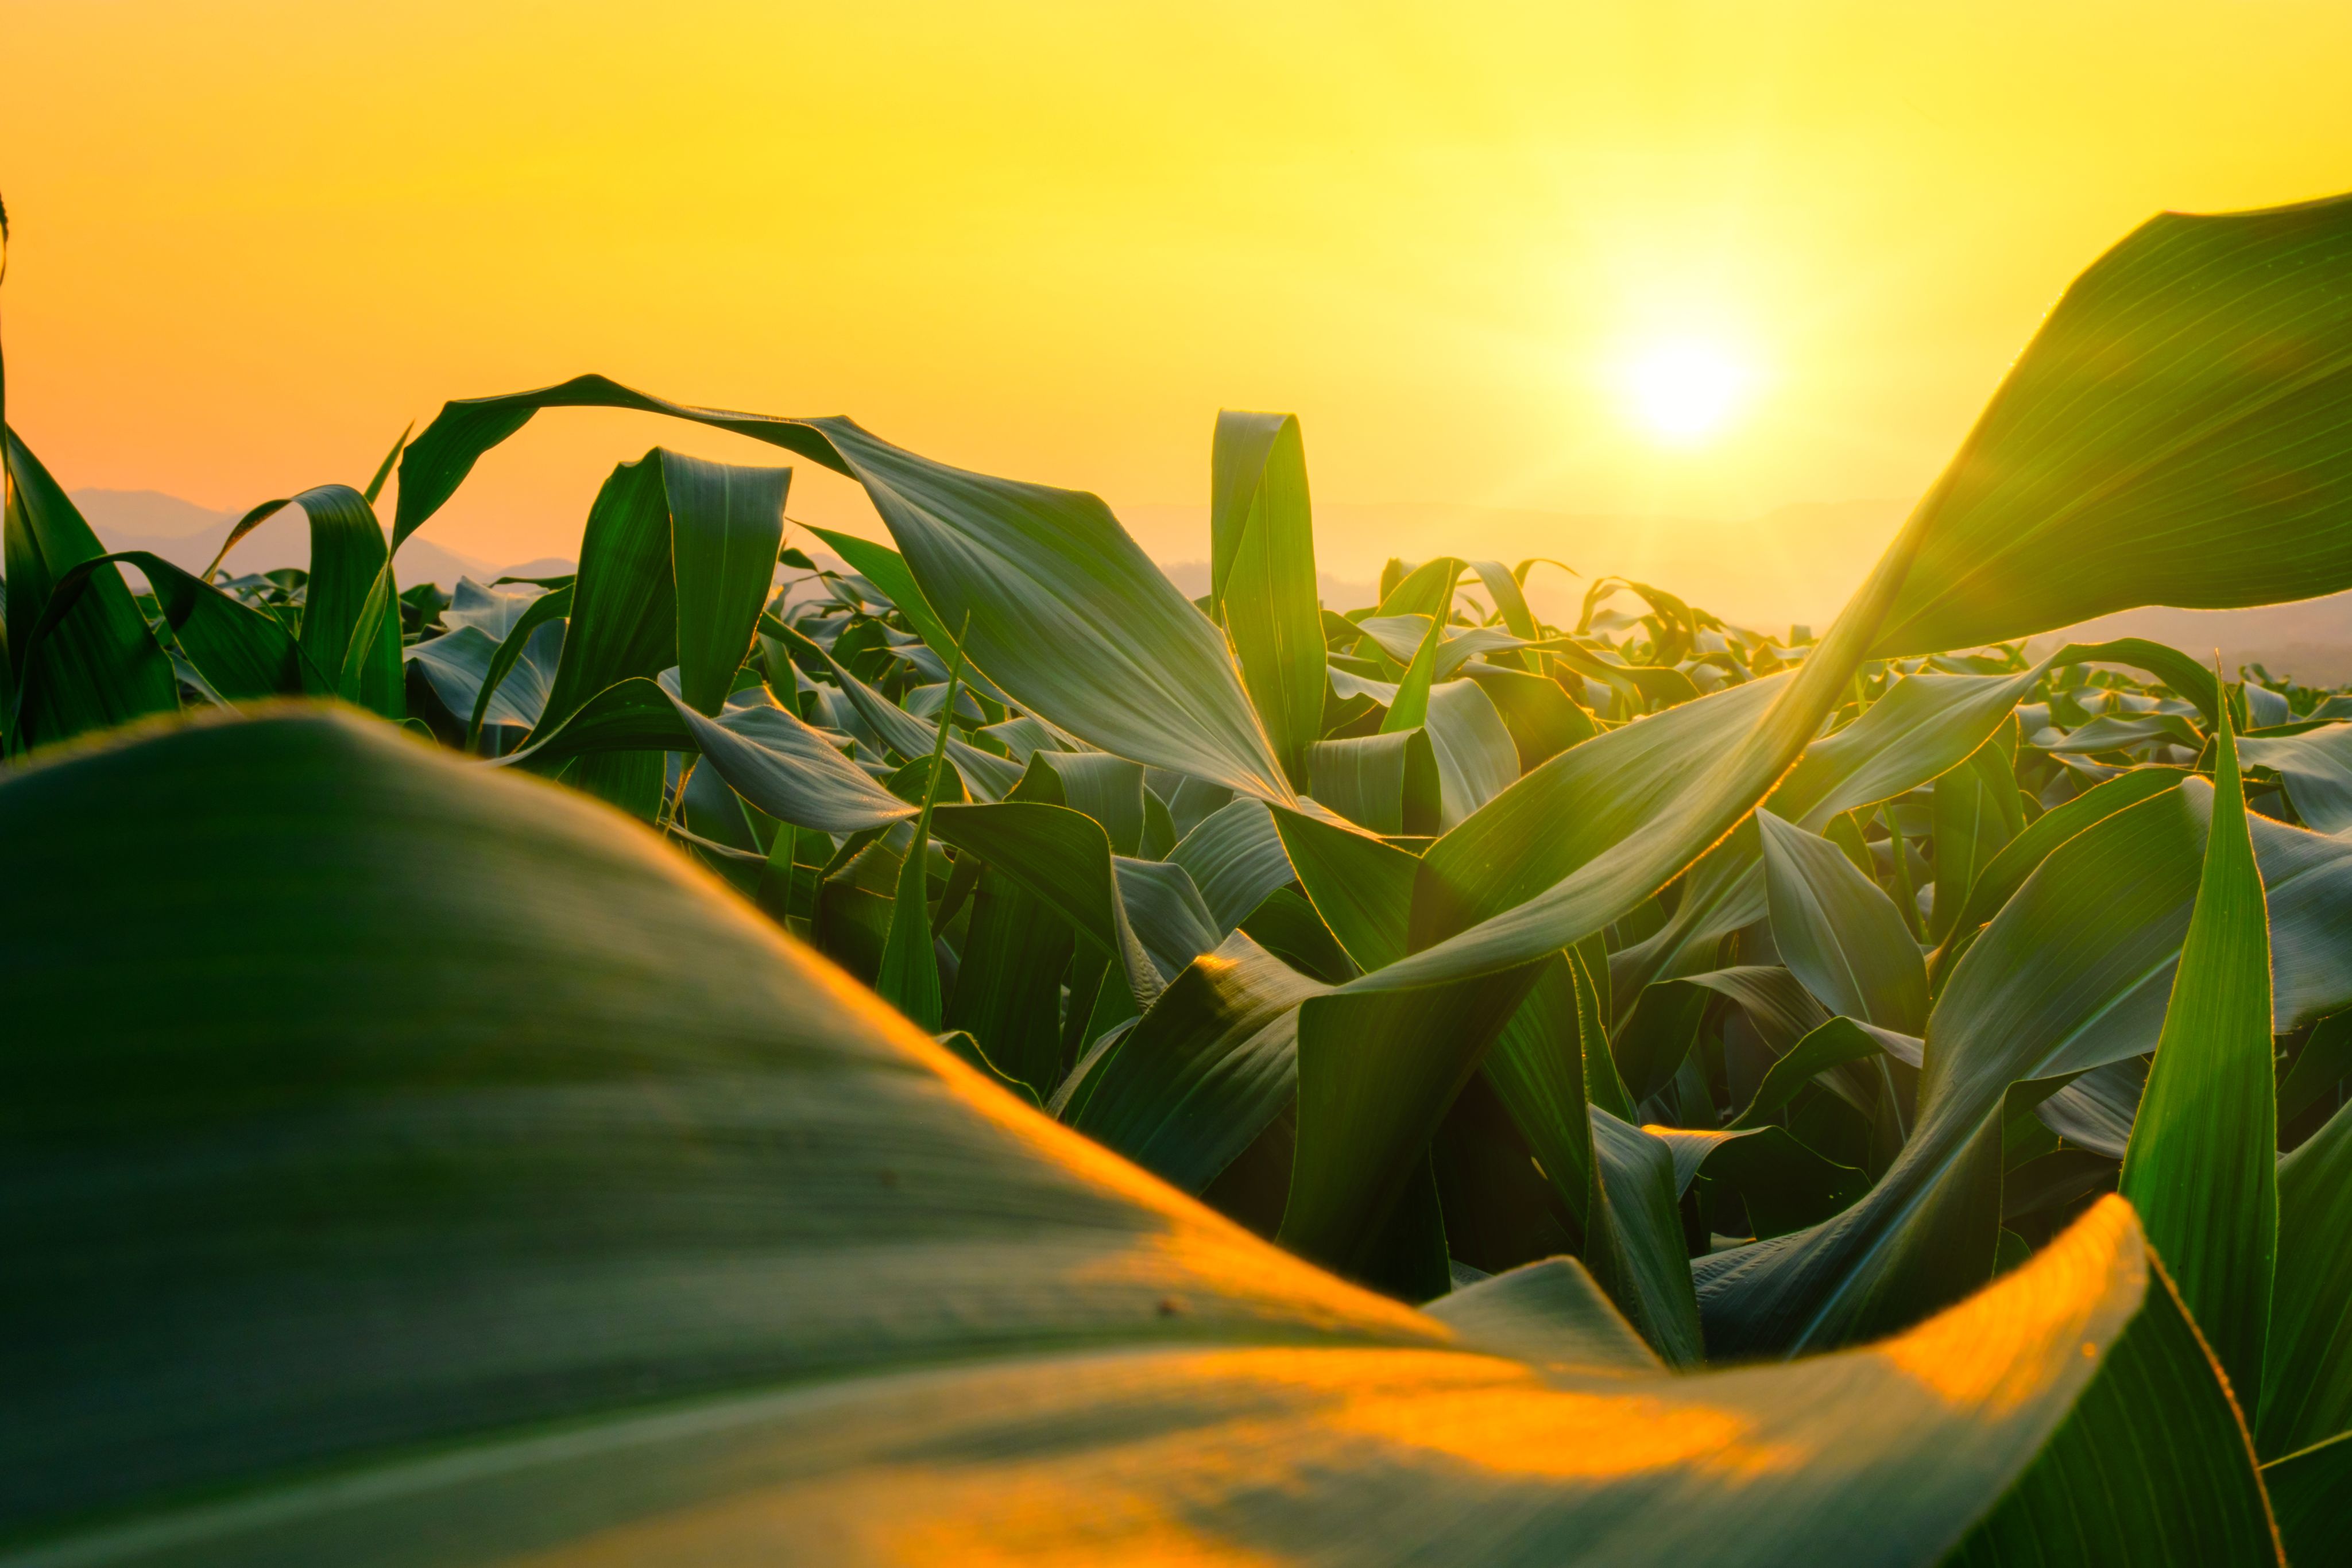 Green leaves reflect the sunset in a corn field